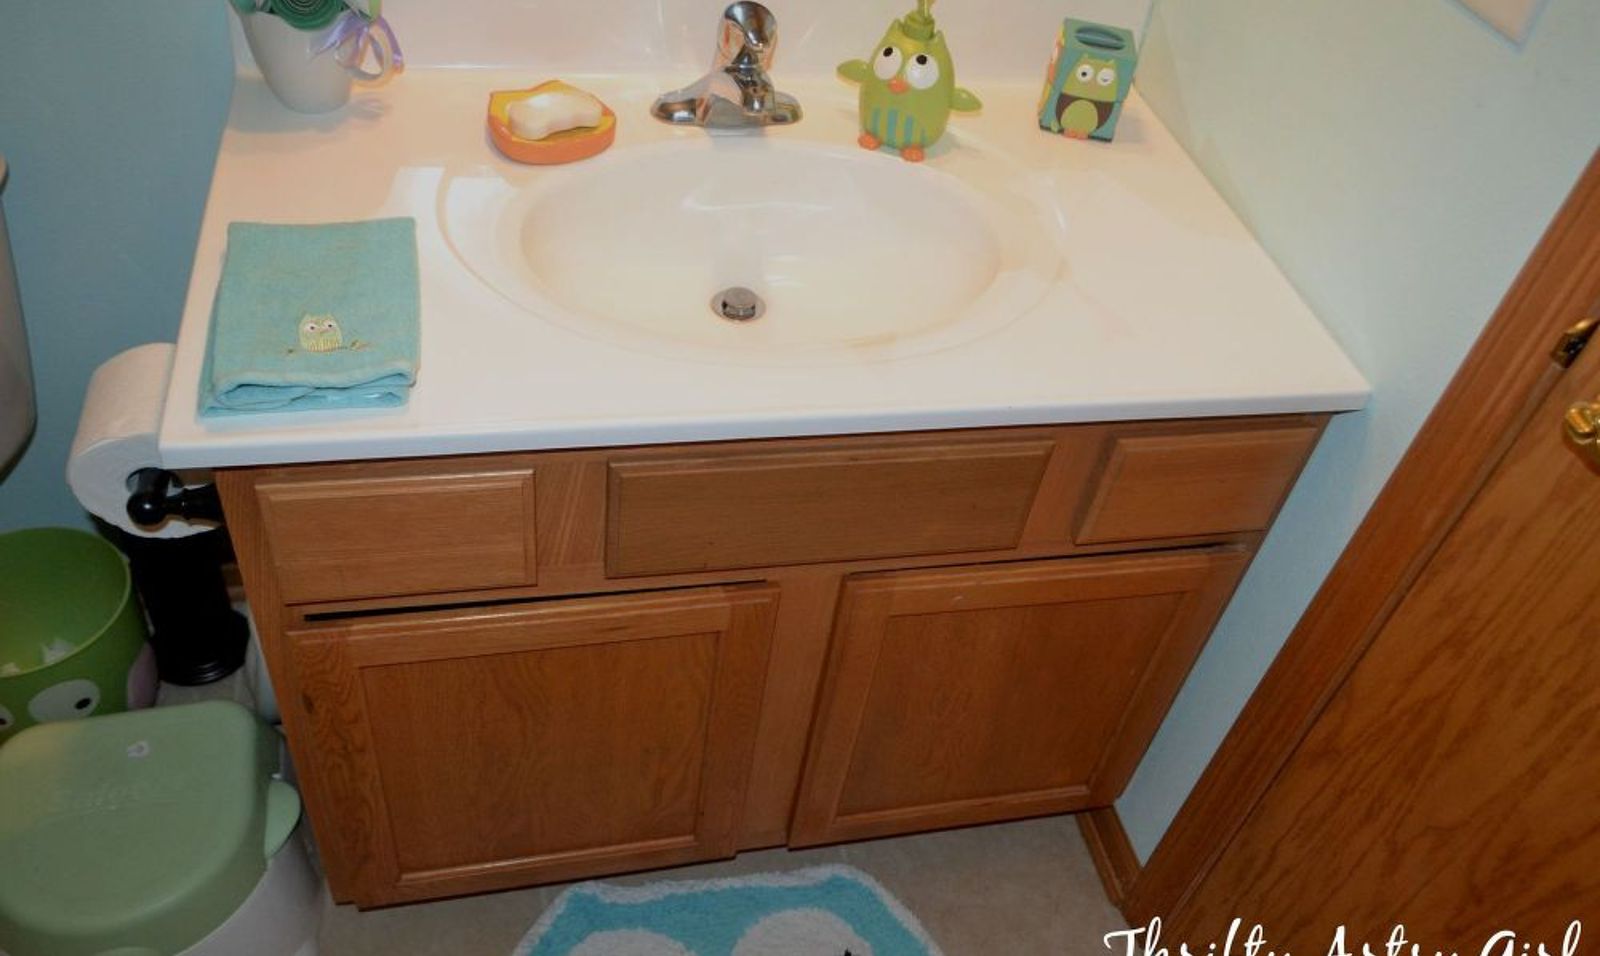 11 LowCost Ways to Replace (or Redo) a Hideous Bathroom